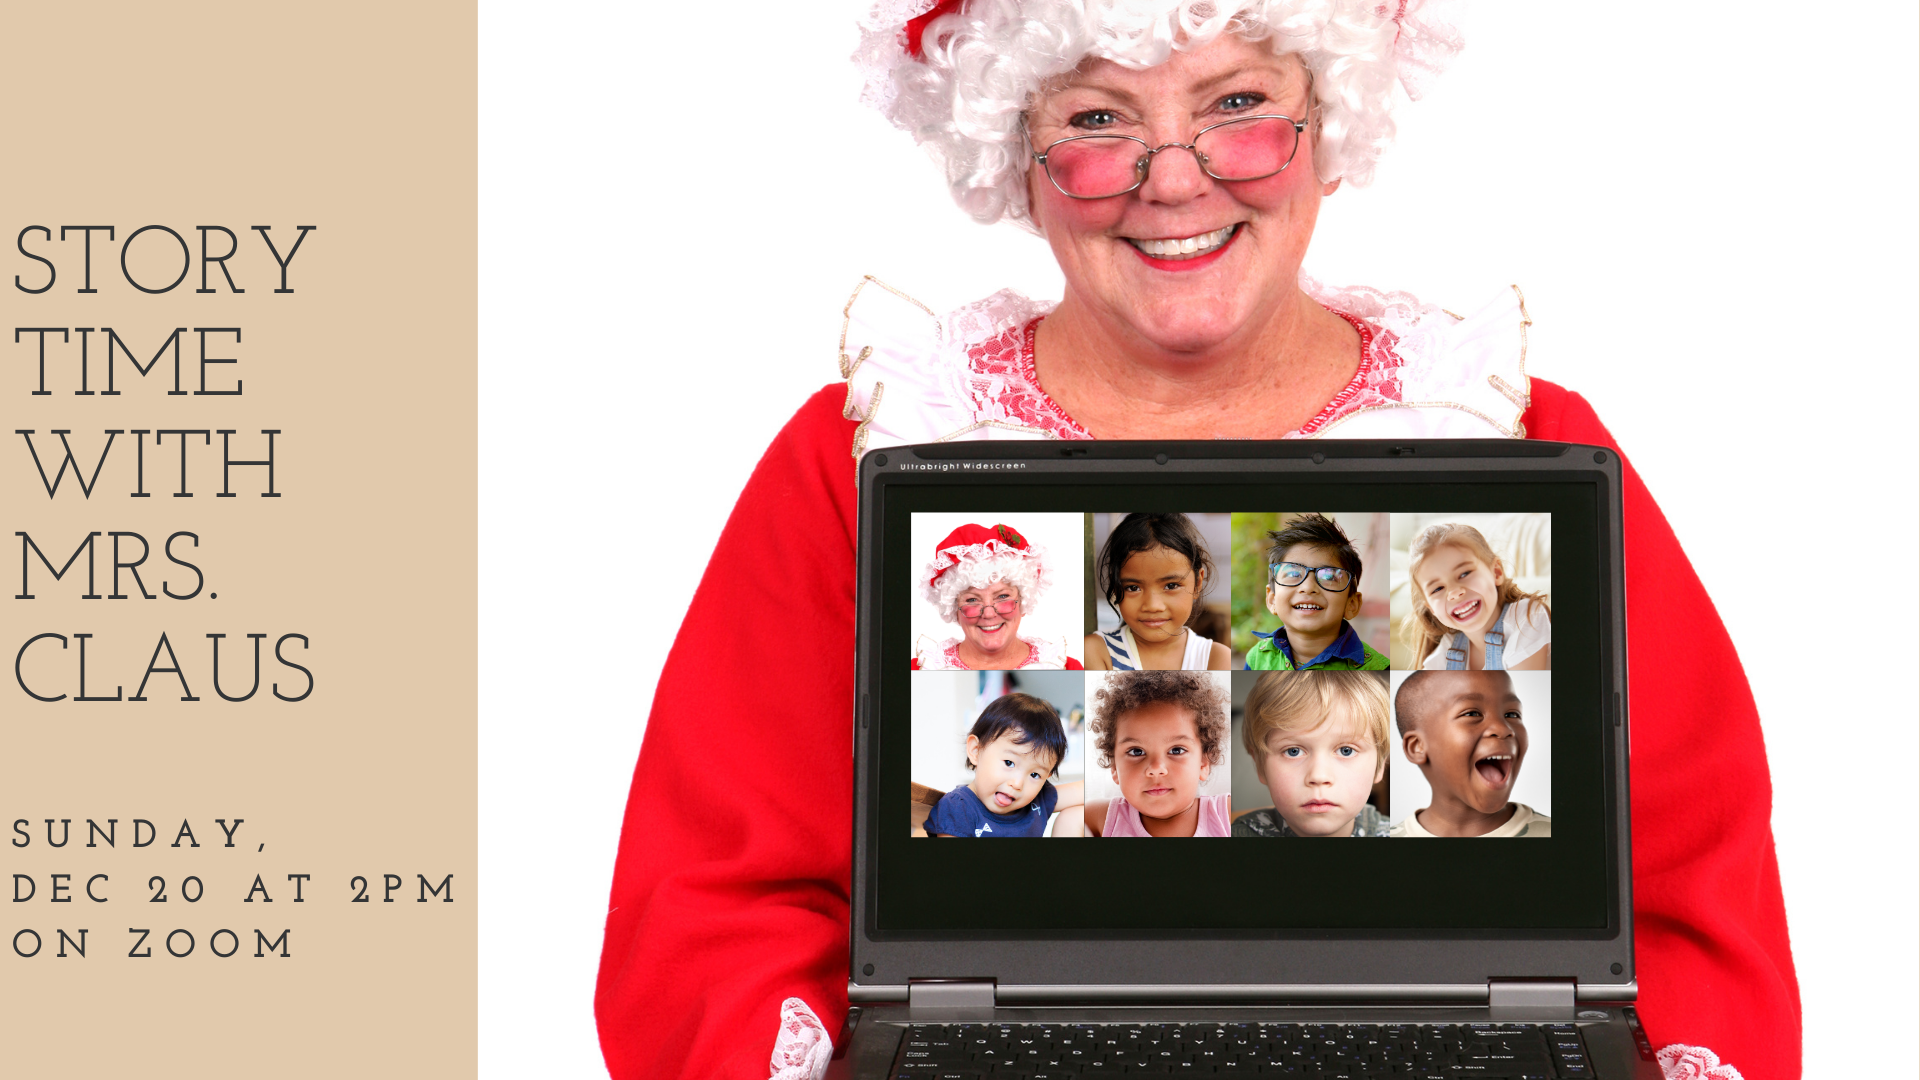 Mrs. Claus, holding a computer